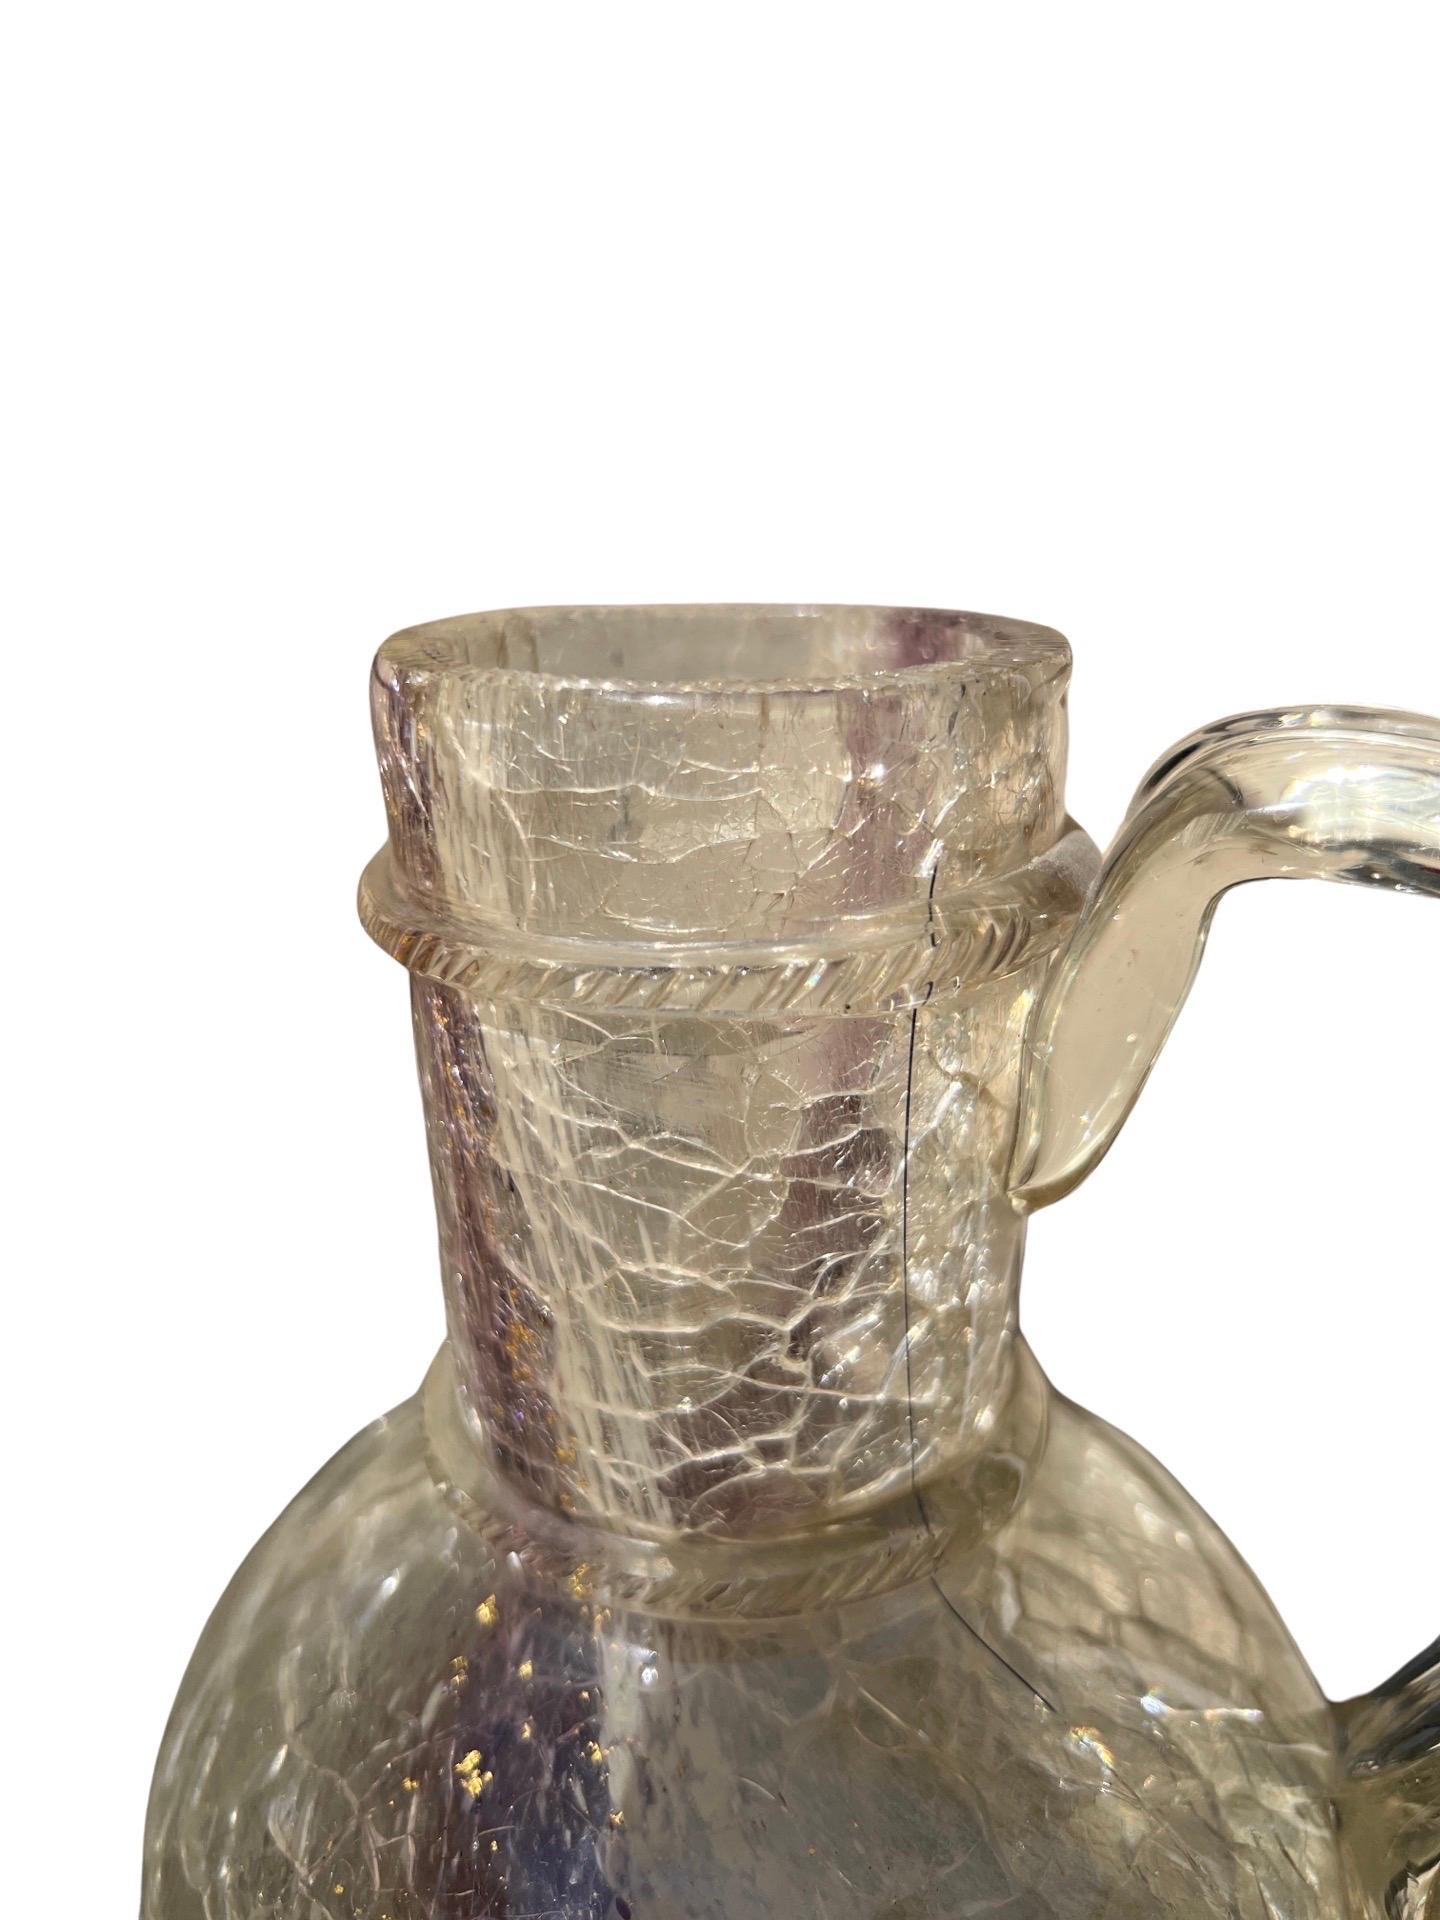 After The Roman Antique - Rock Crystal, Glass & Gold Flecking Grand Tour Pitcher For Sale 5